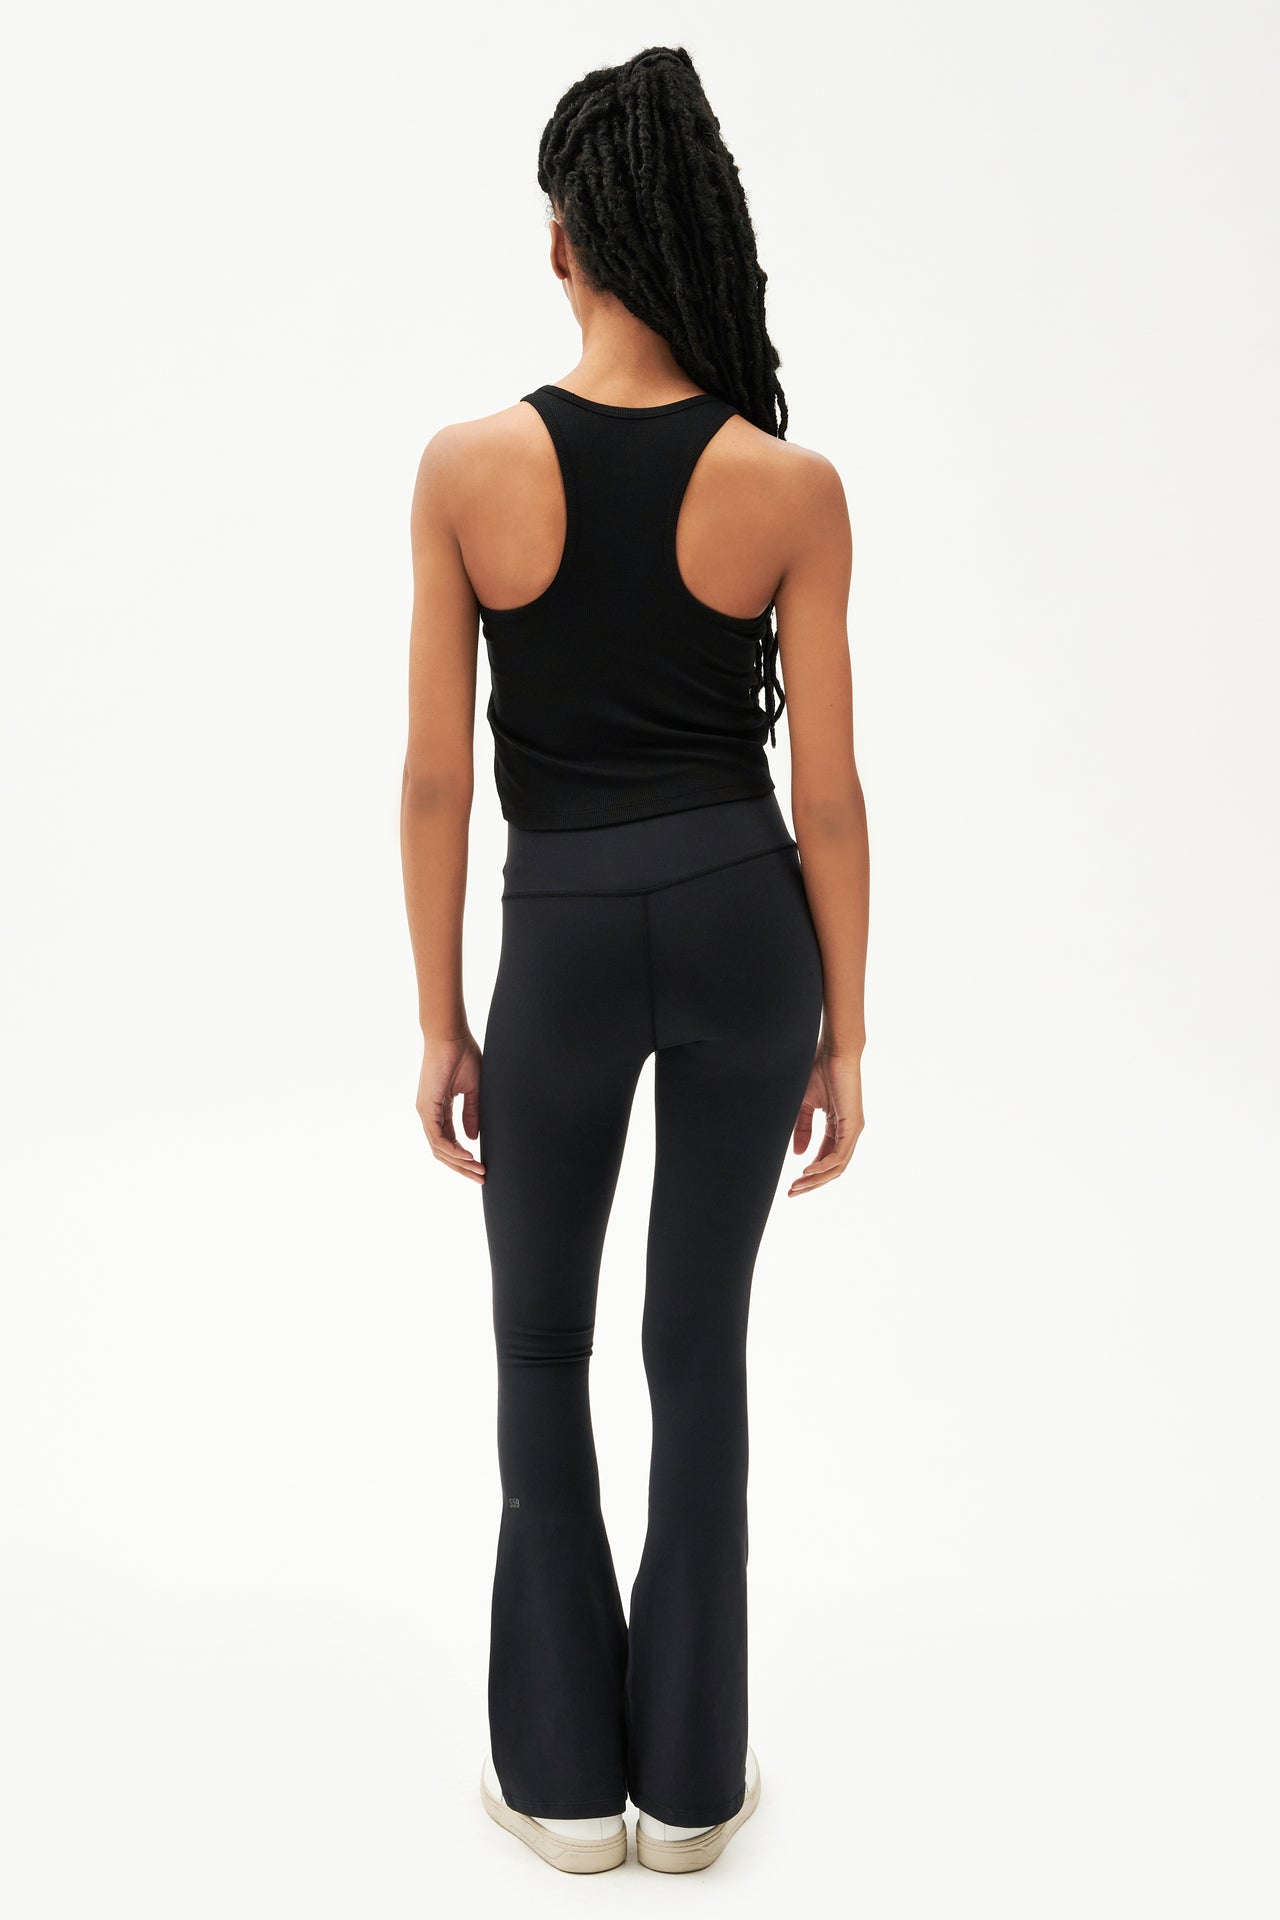 Full back view of girl wearing a ribbed black cropped tank top and black flared leggings with white shoes